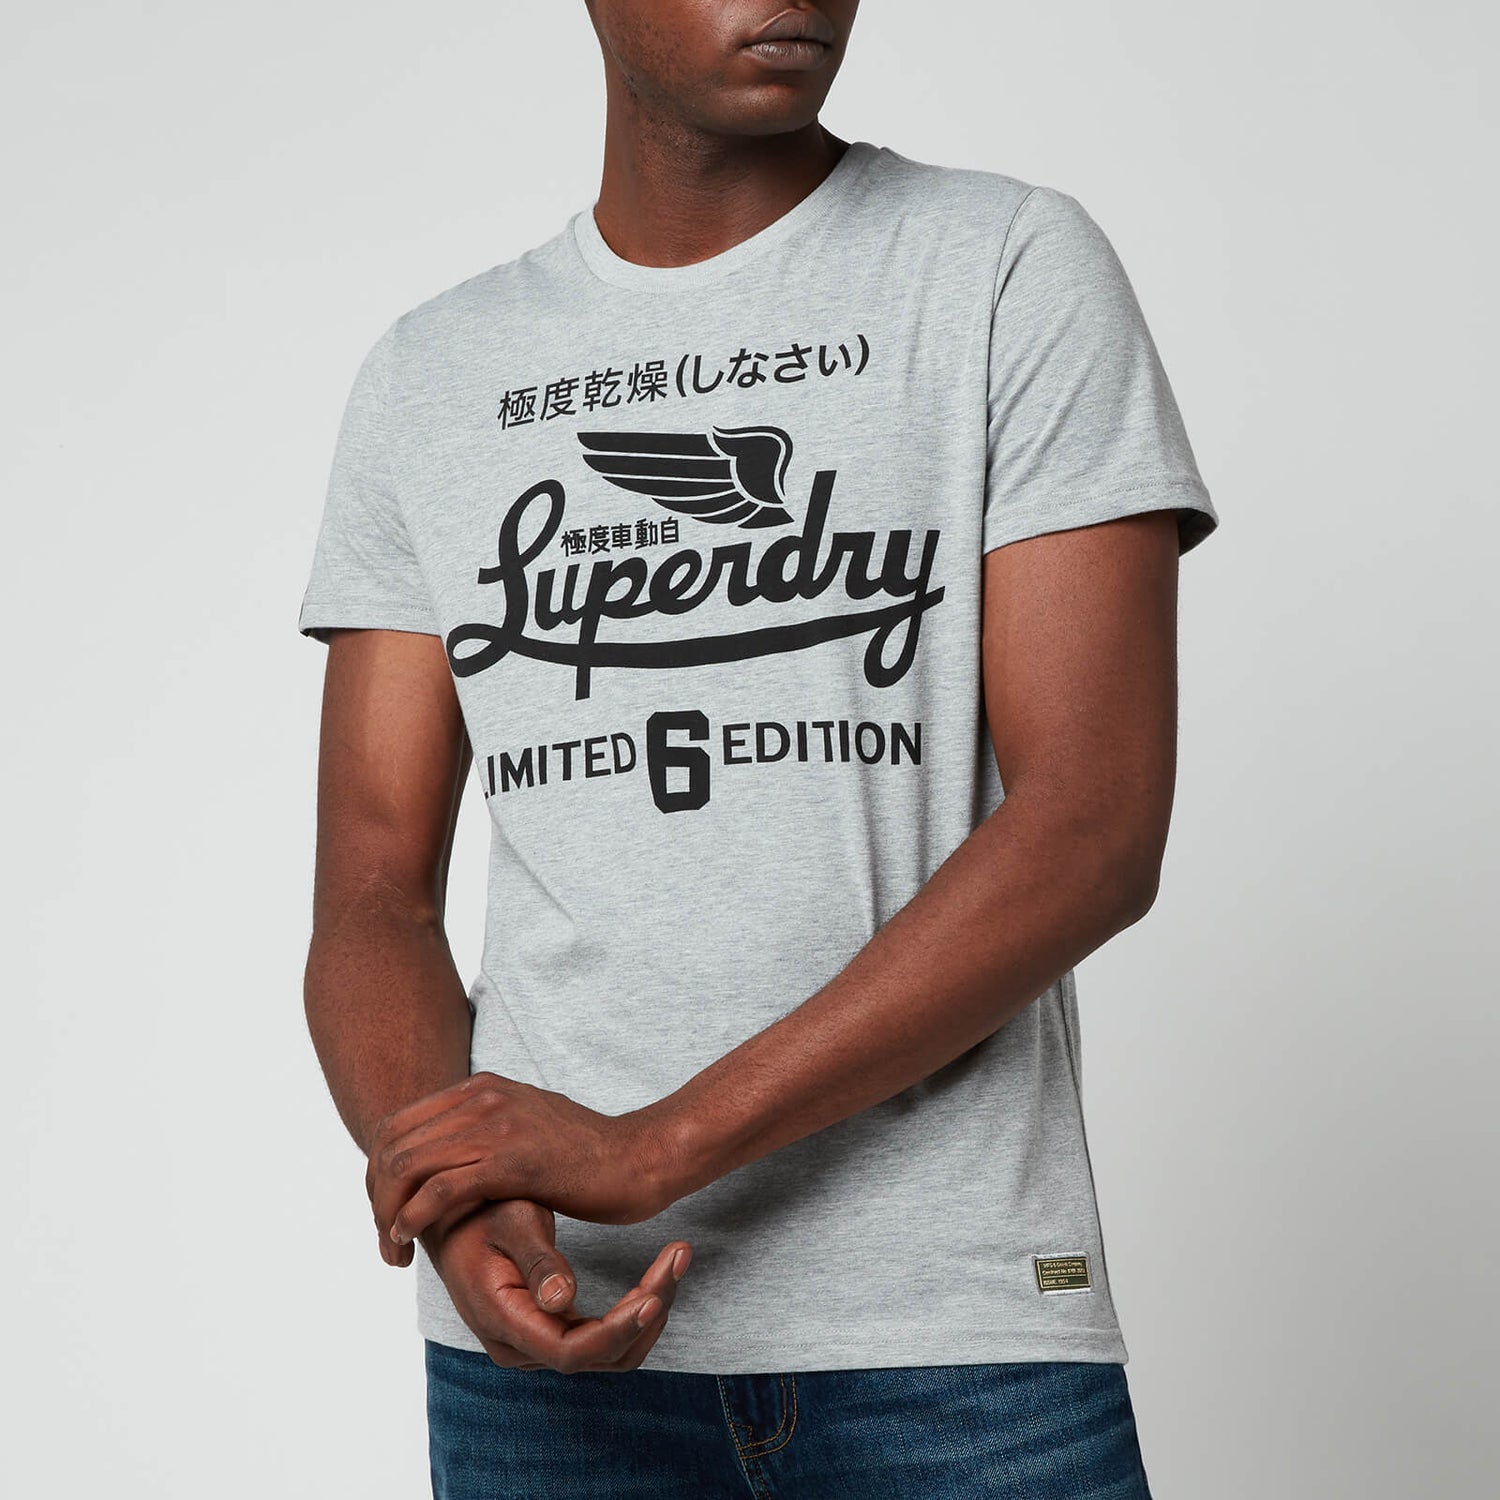 Superdry Men's Military Graphic T-Shirt - Grey Marl